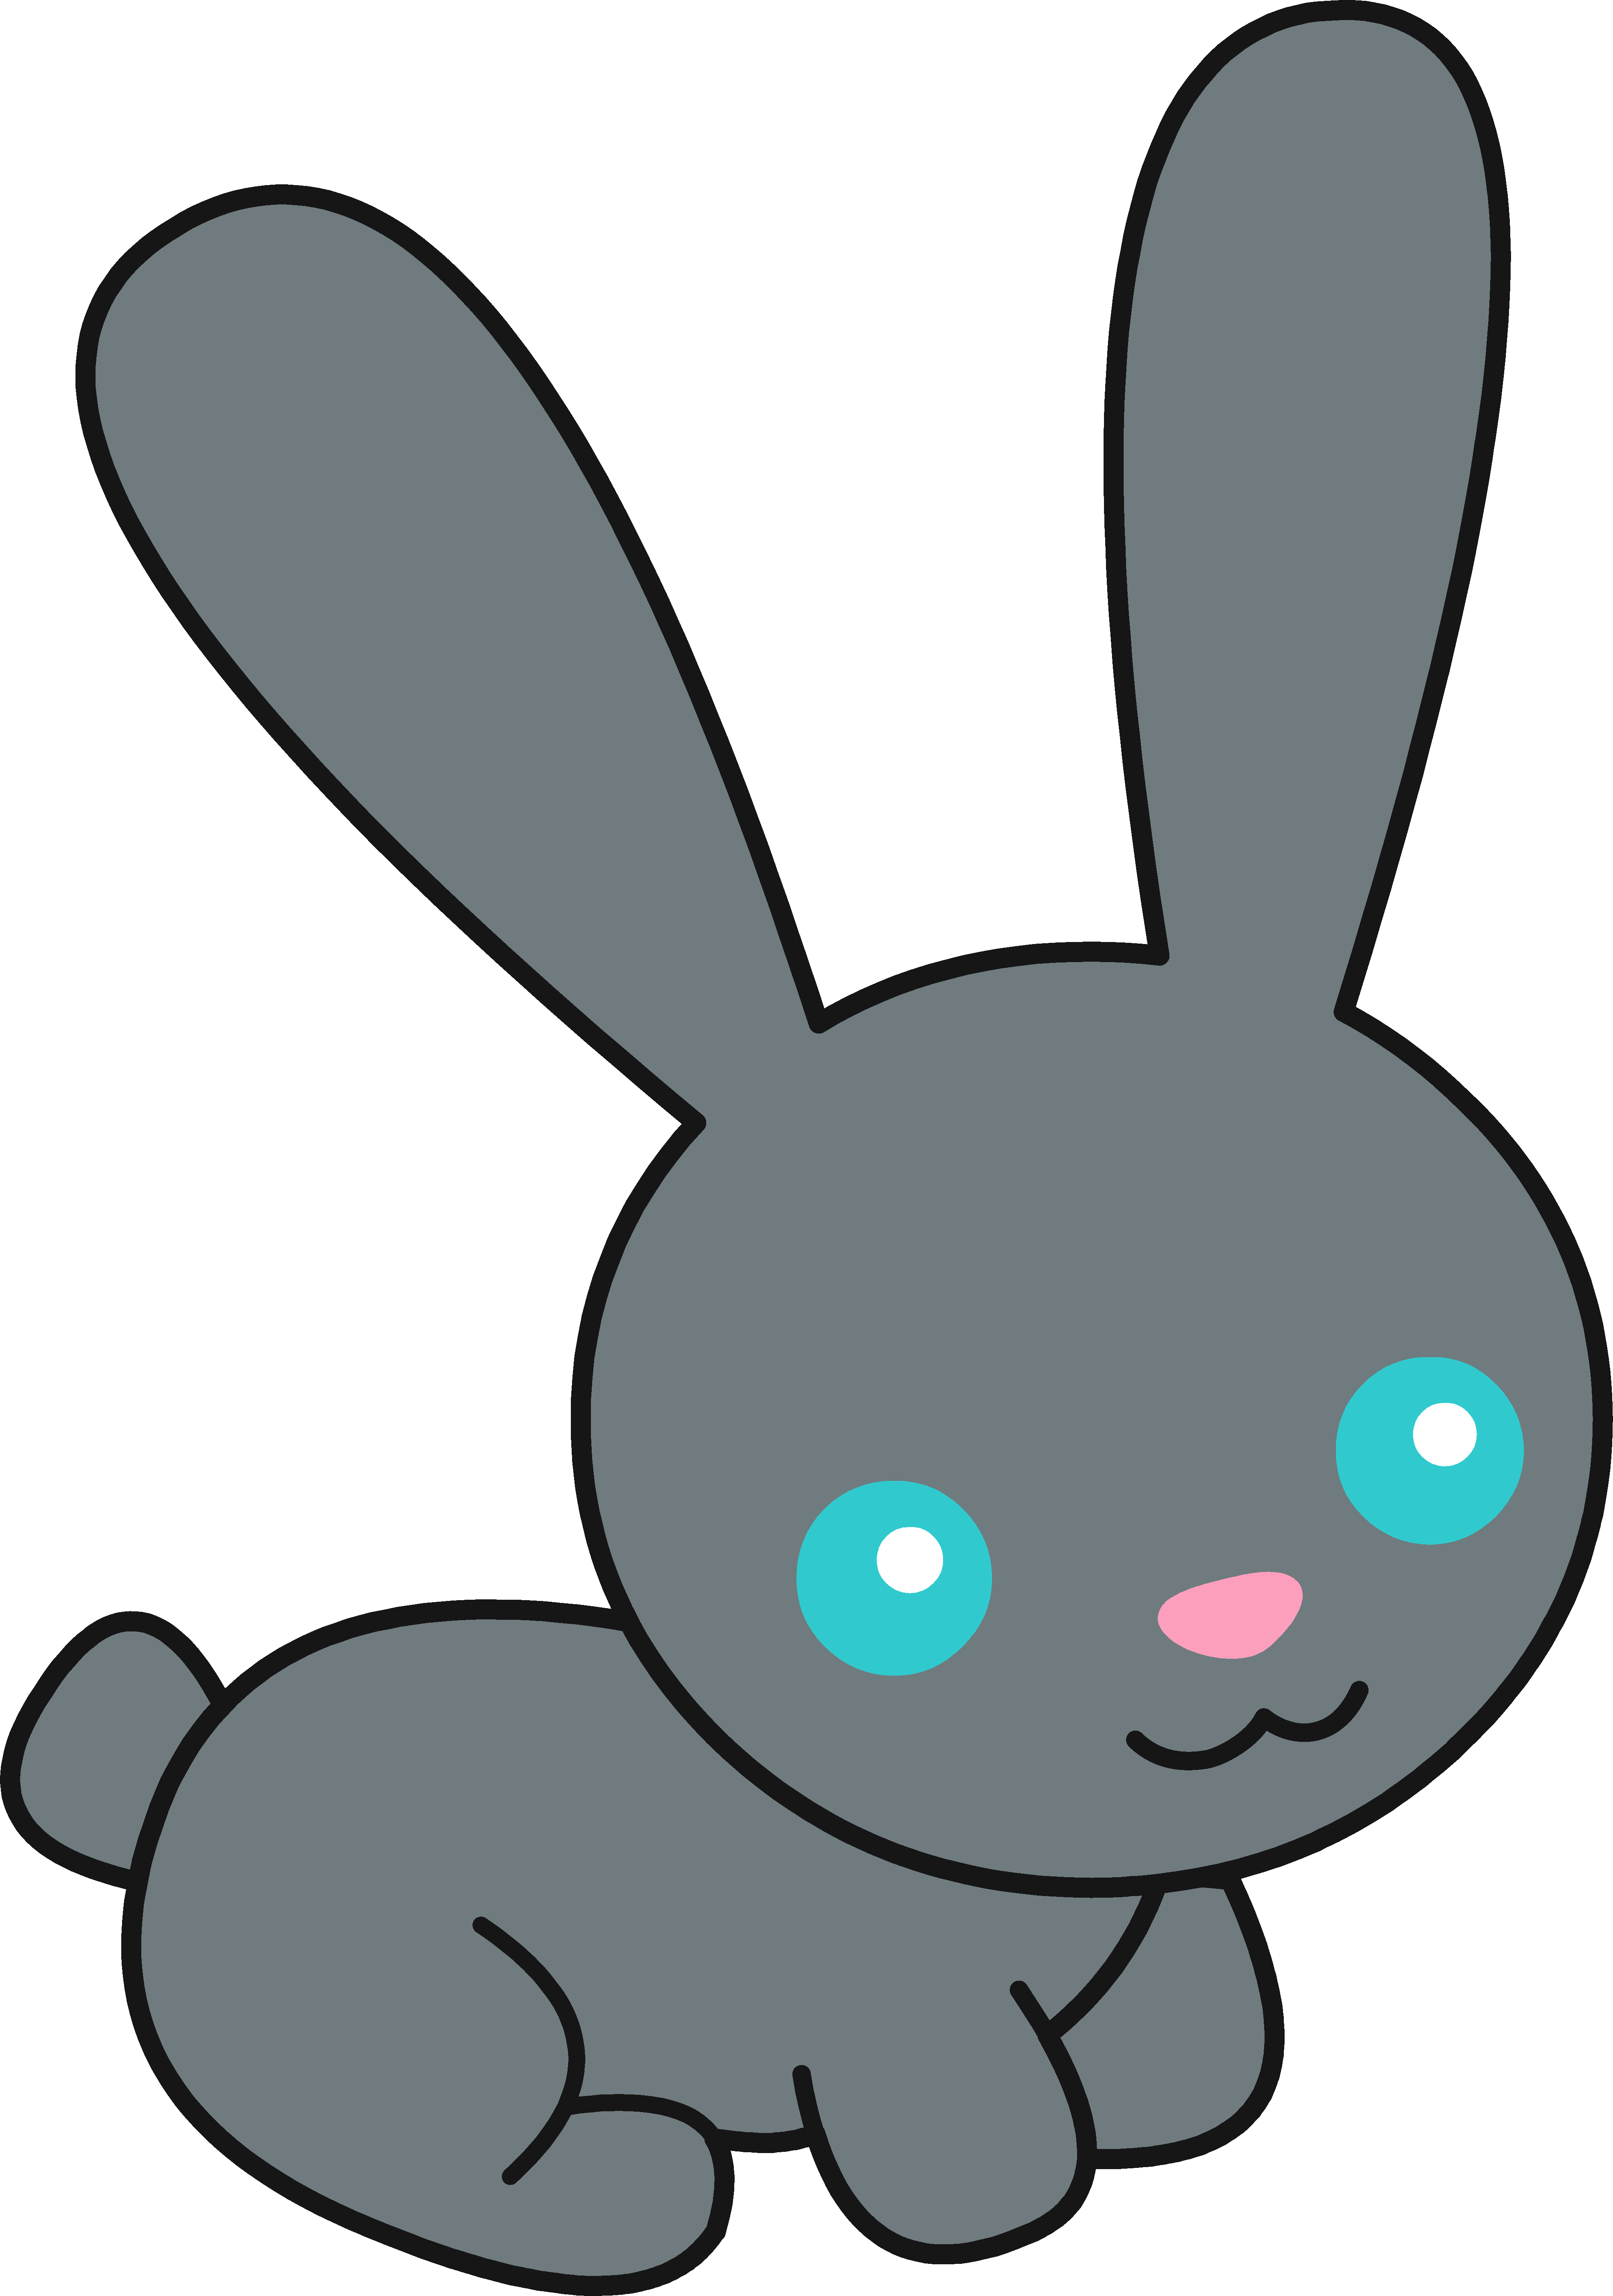 Bunny clipart images clipart 4